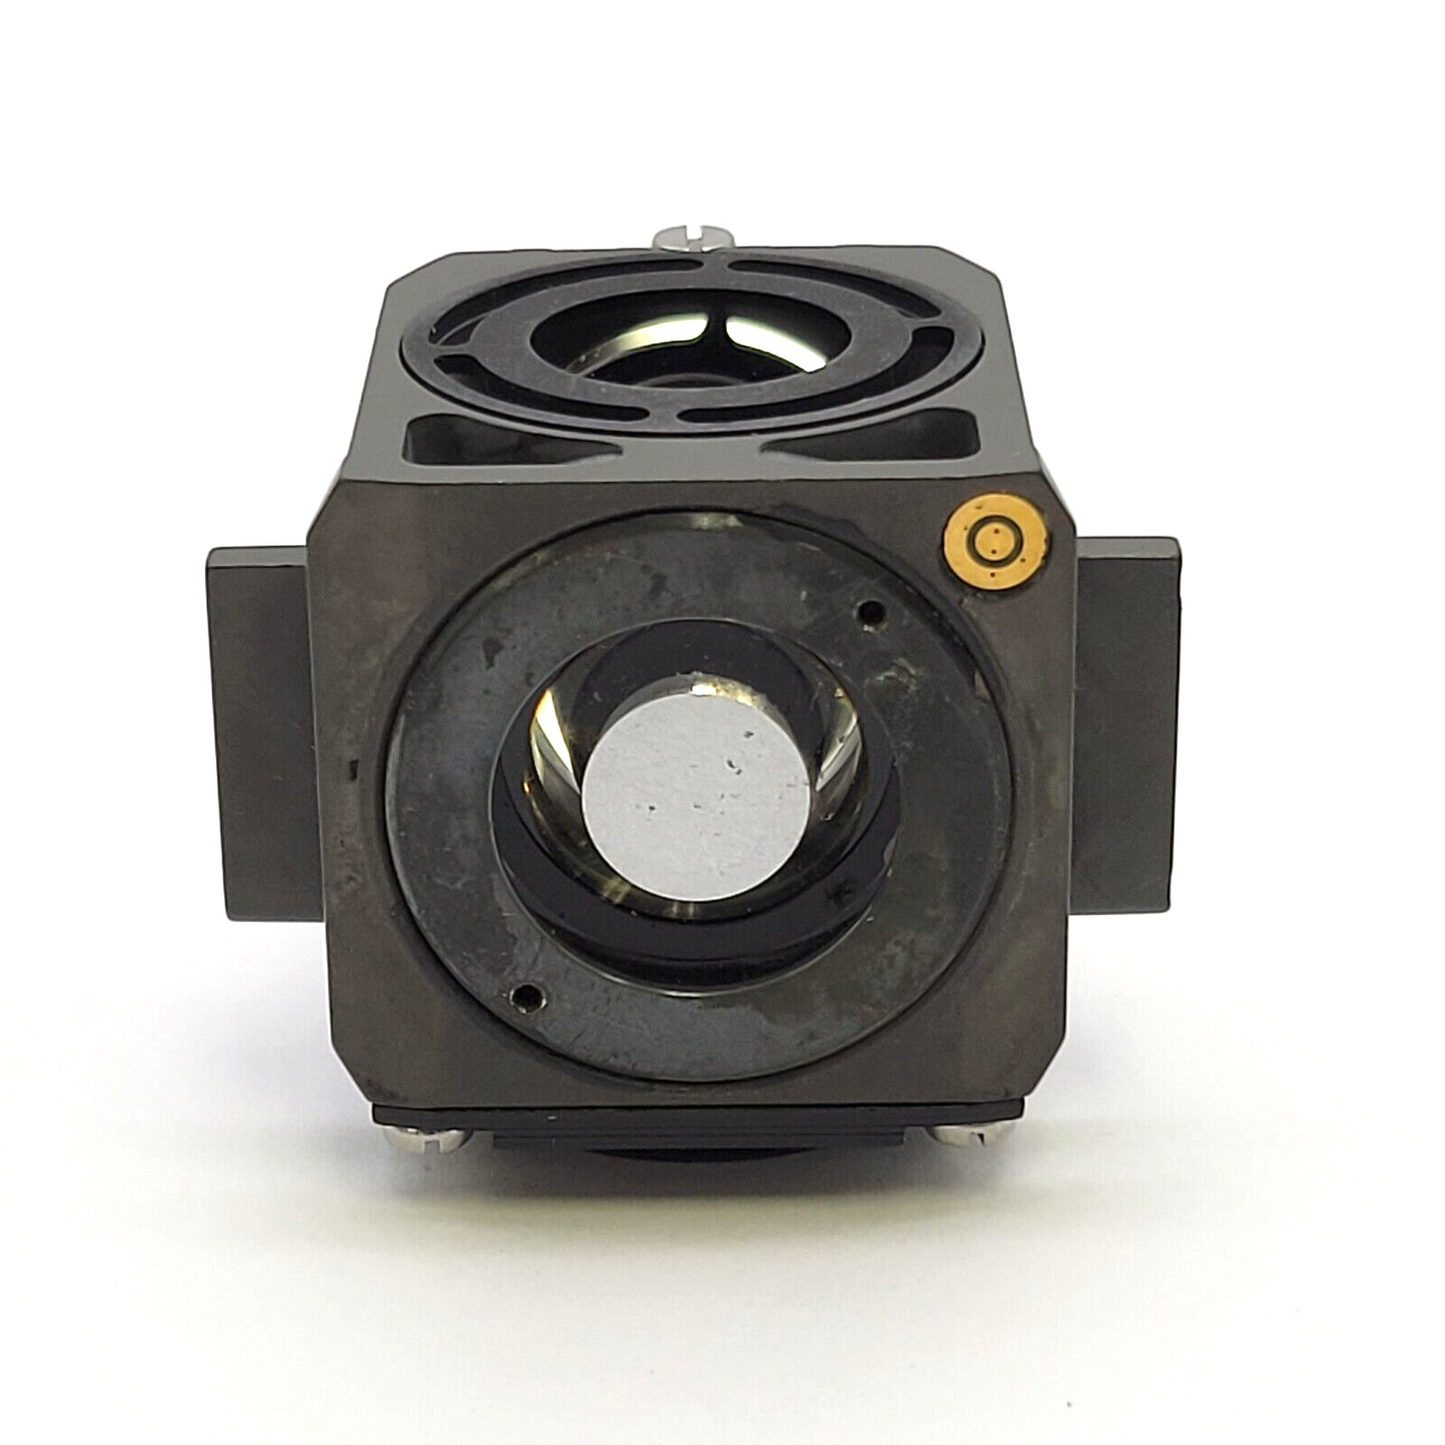 Zeiss Microscope Darkfield Filter Cube Module 424922 for Reflected Light - microscopemarketplace